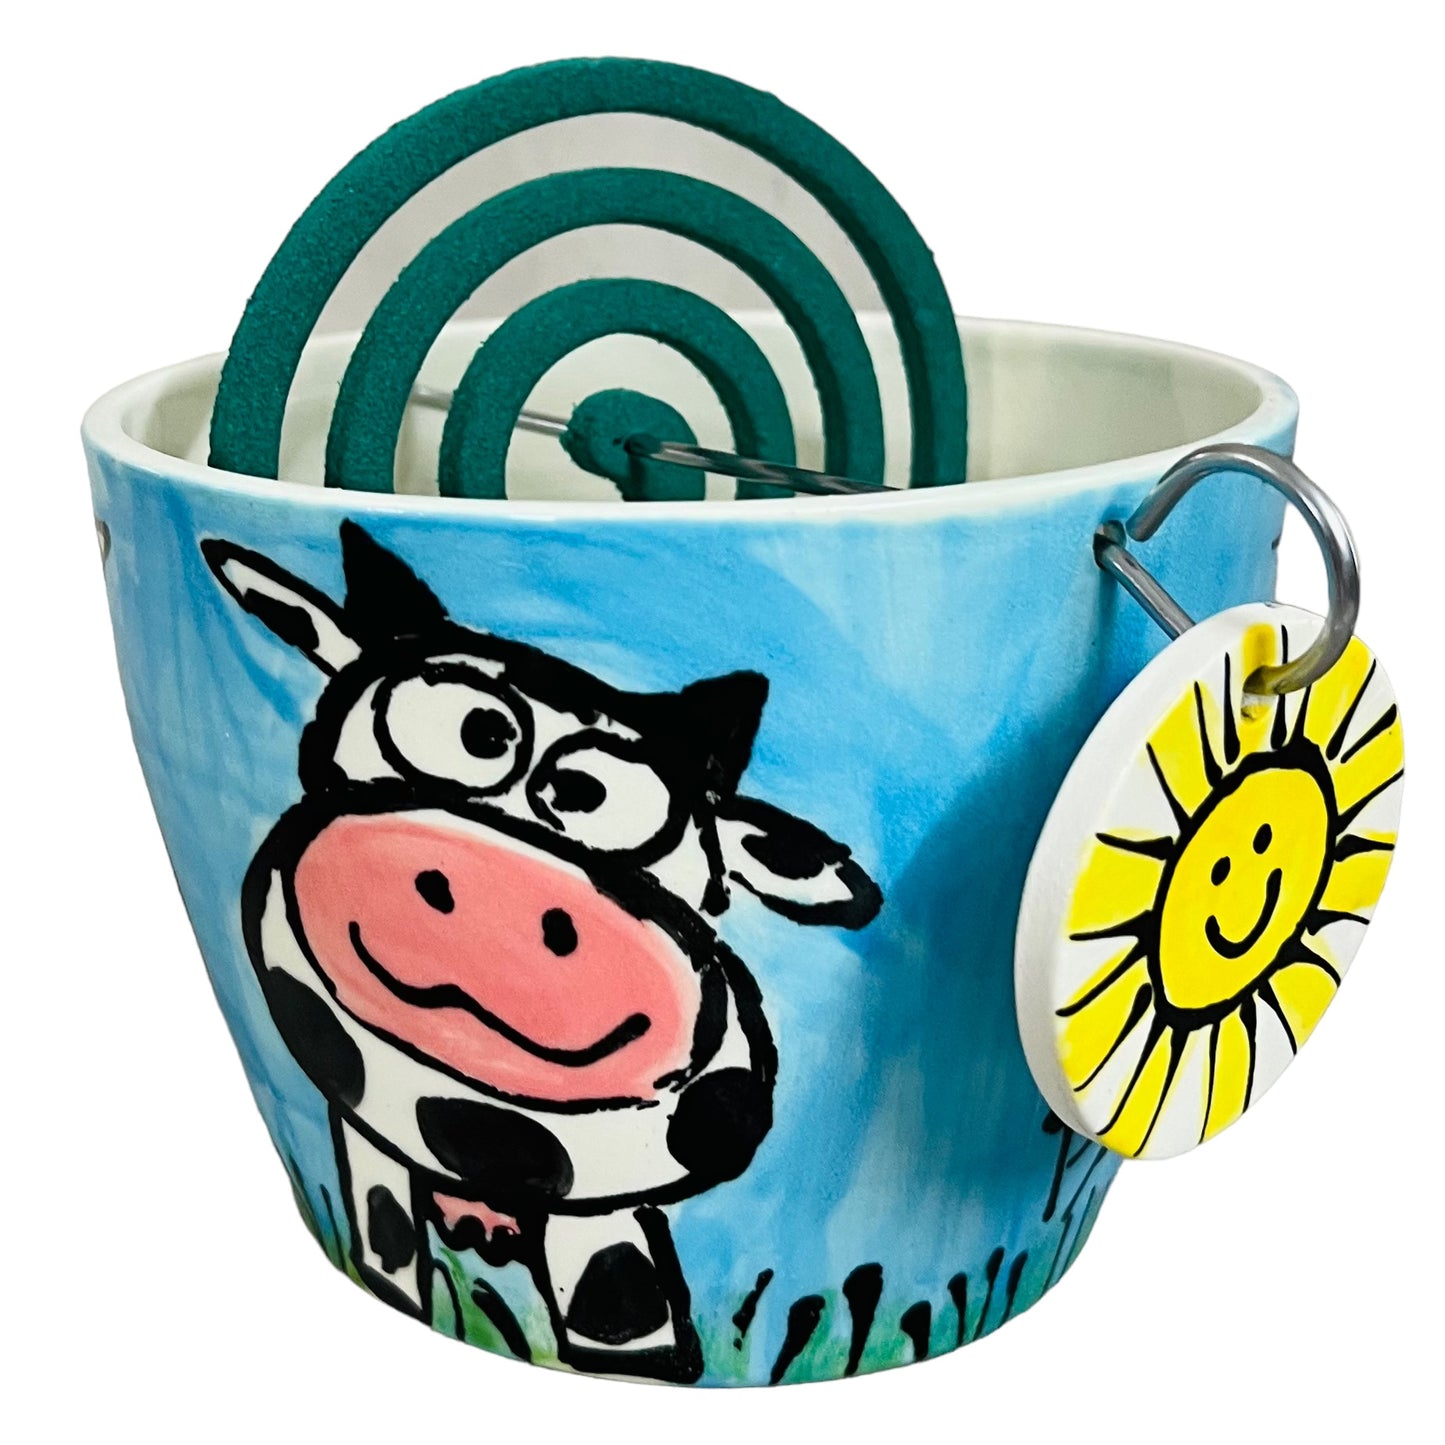 Cow Mosquito Coil holder